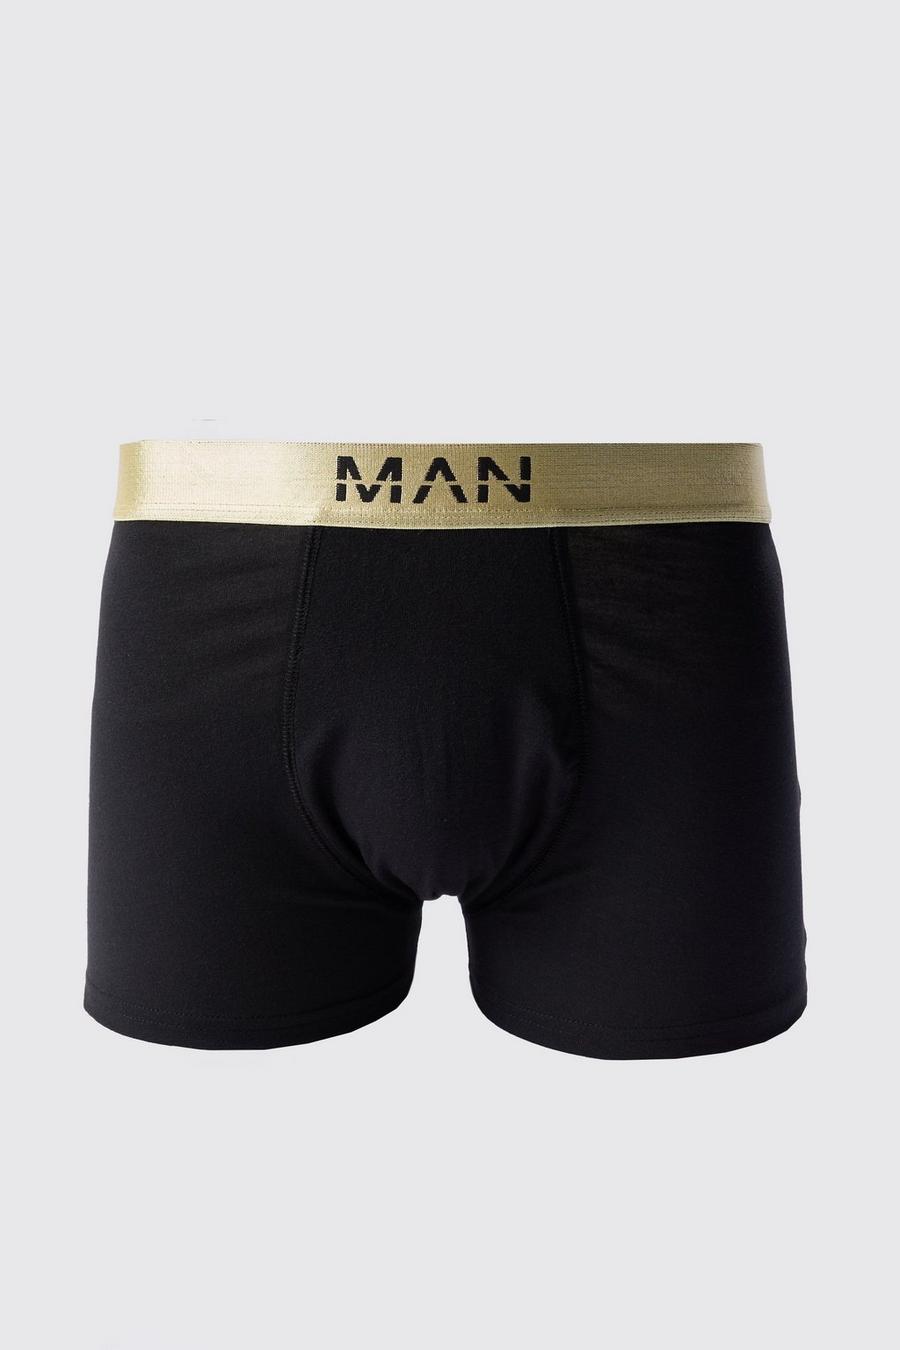 Man Dash Gold Waistband Boxers In Black